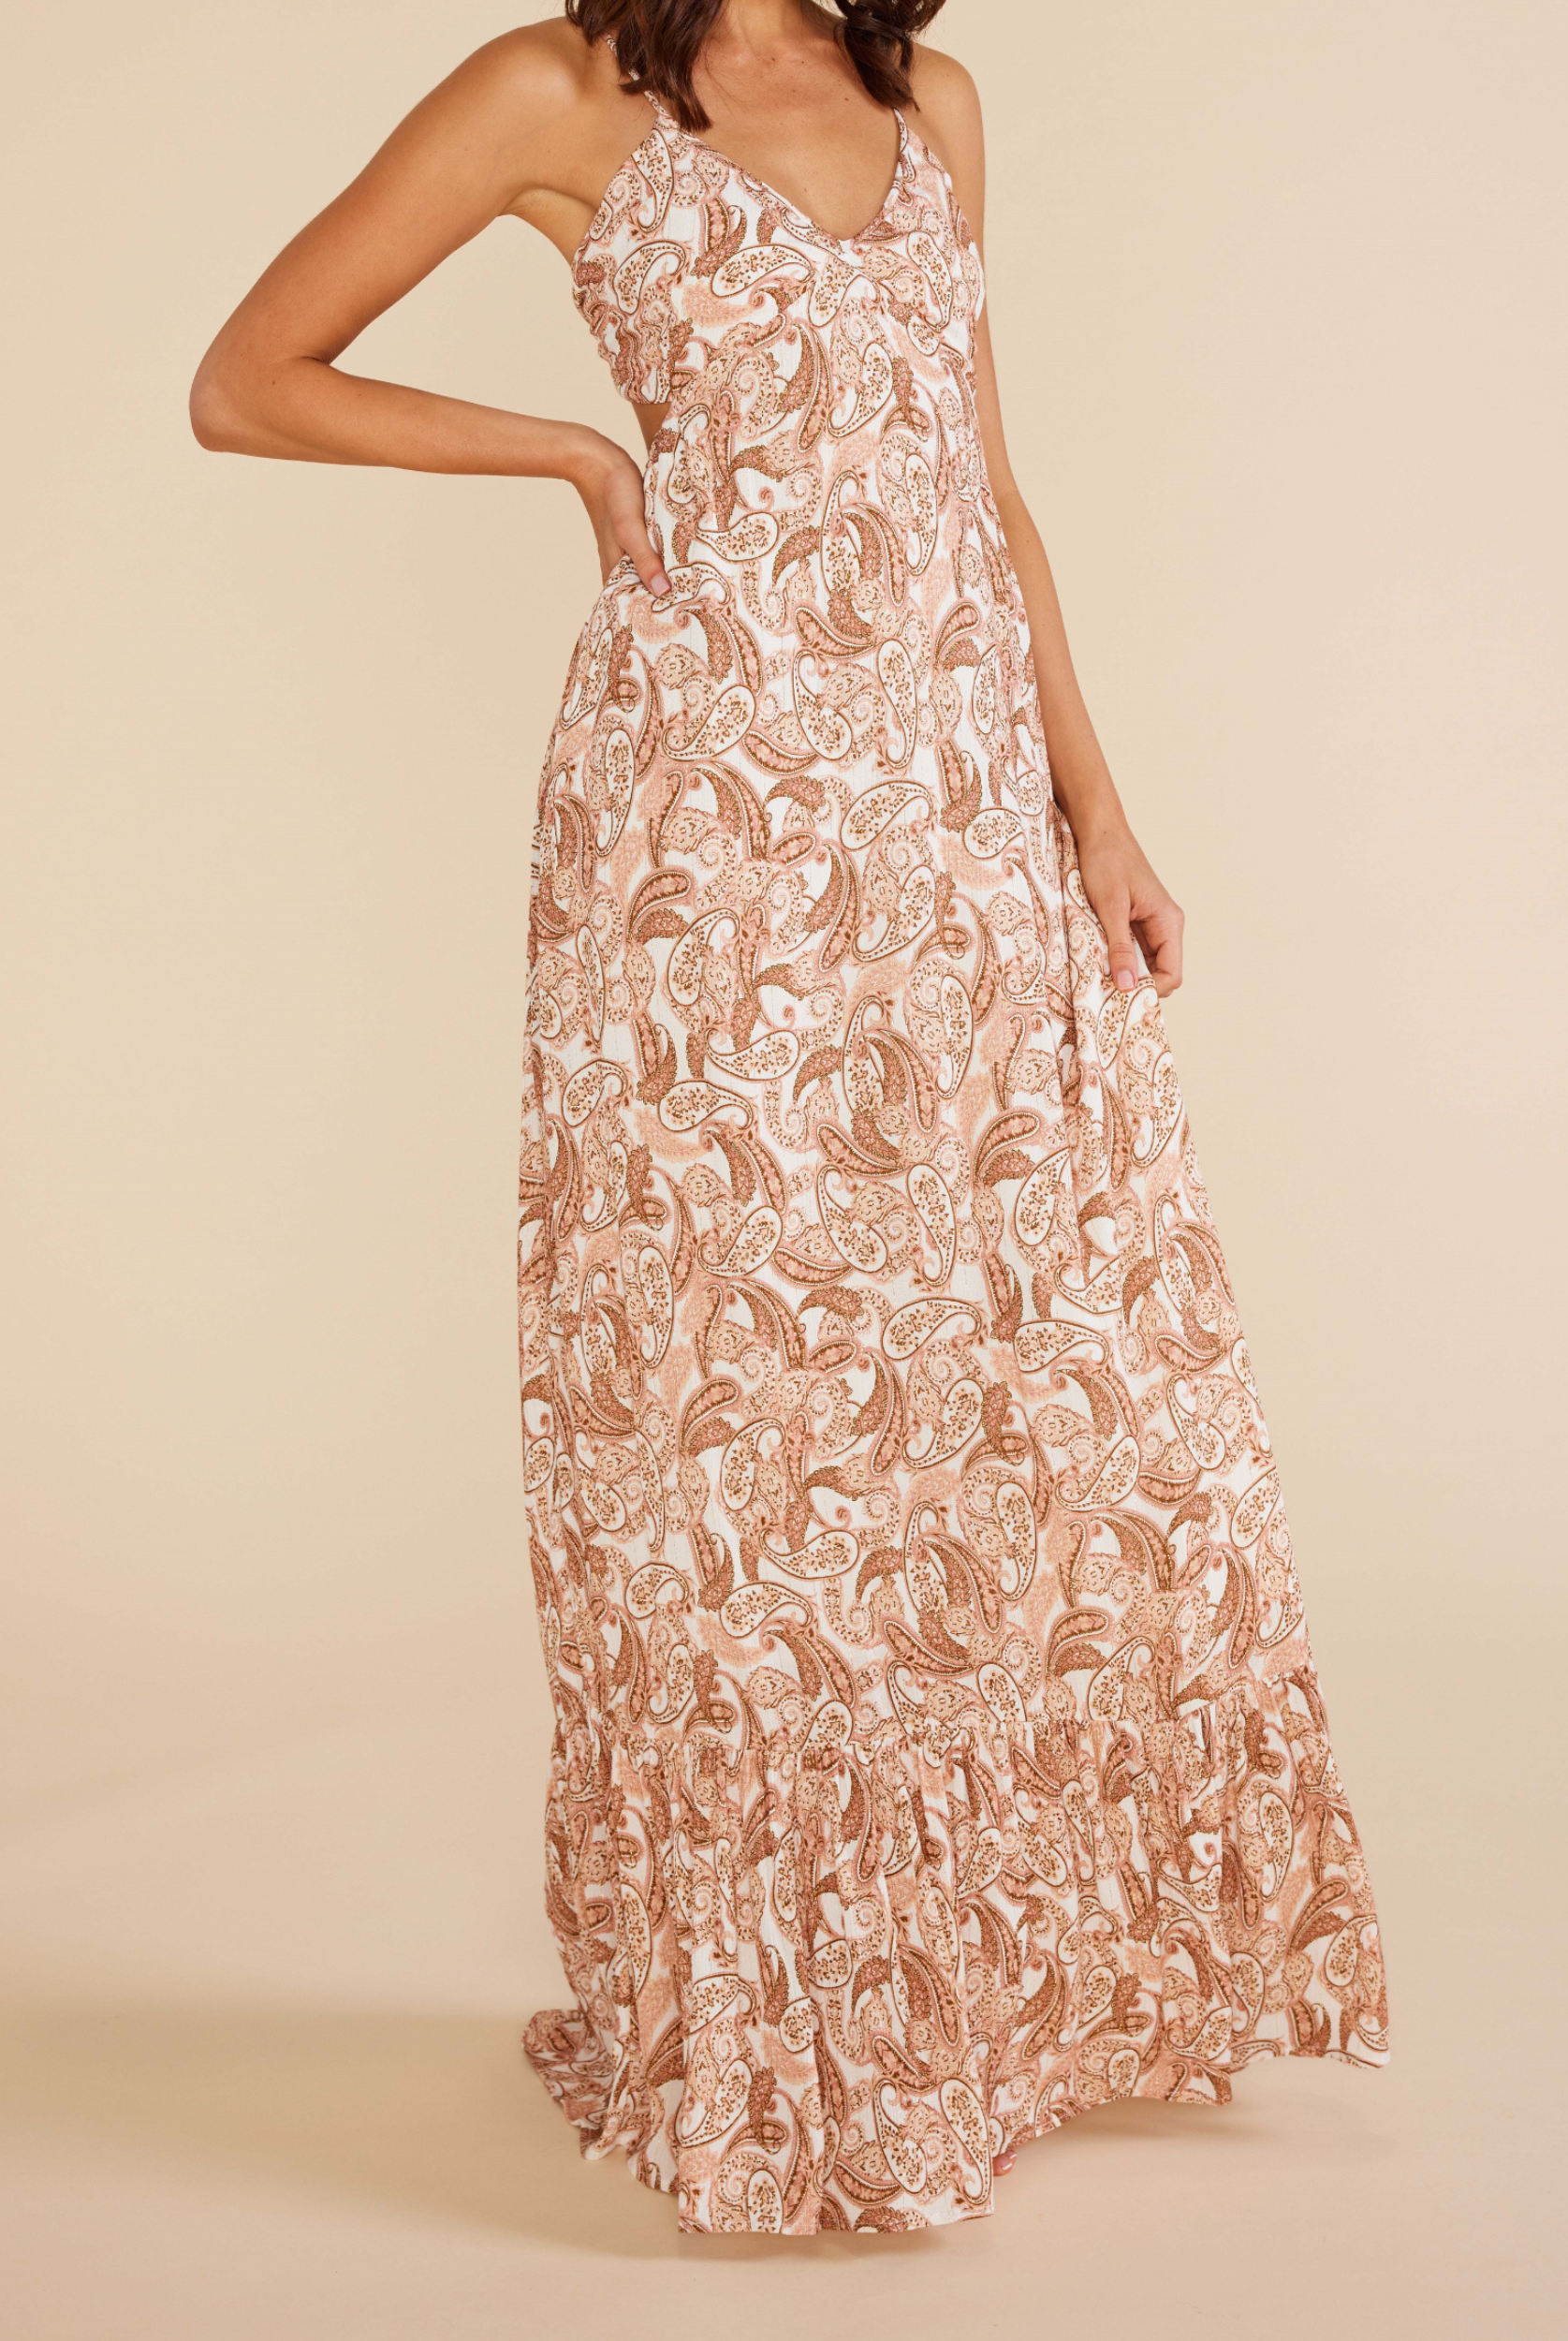 Model wearing the Neveah maxi dress in paisley print with tie back and adjustable straps